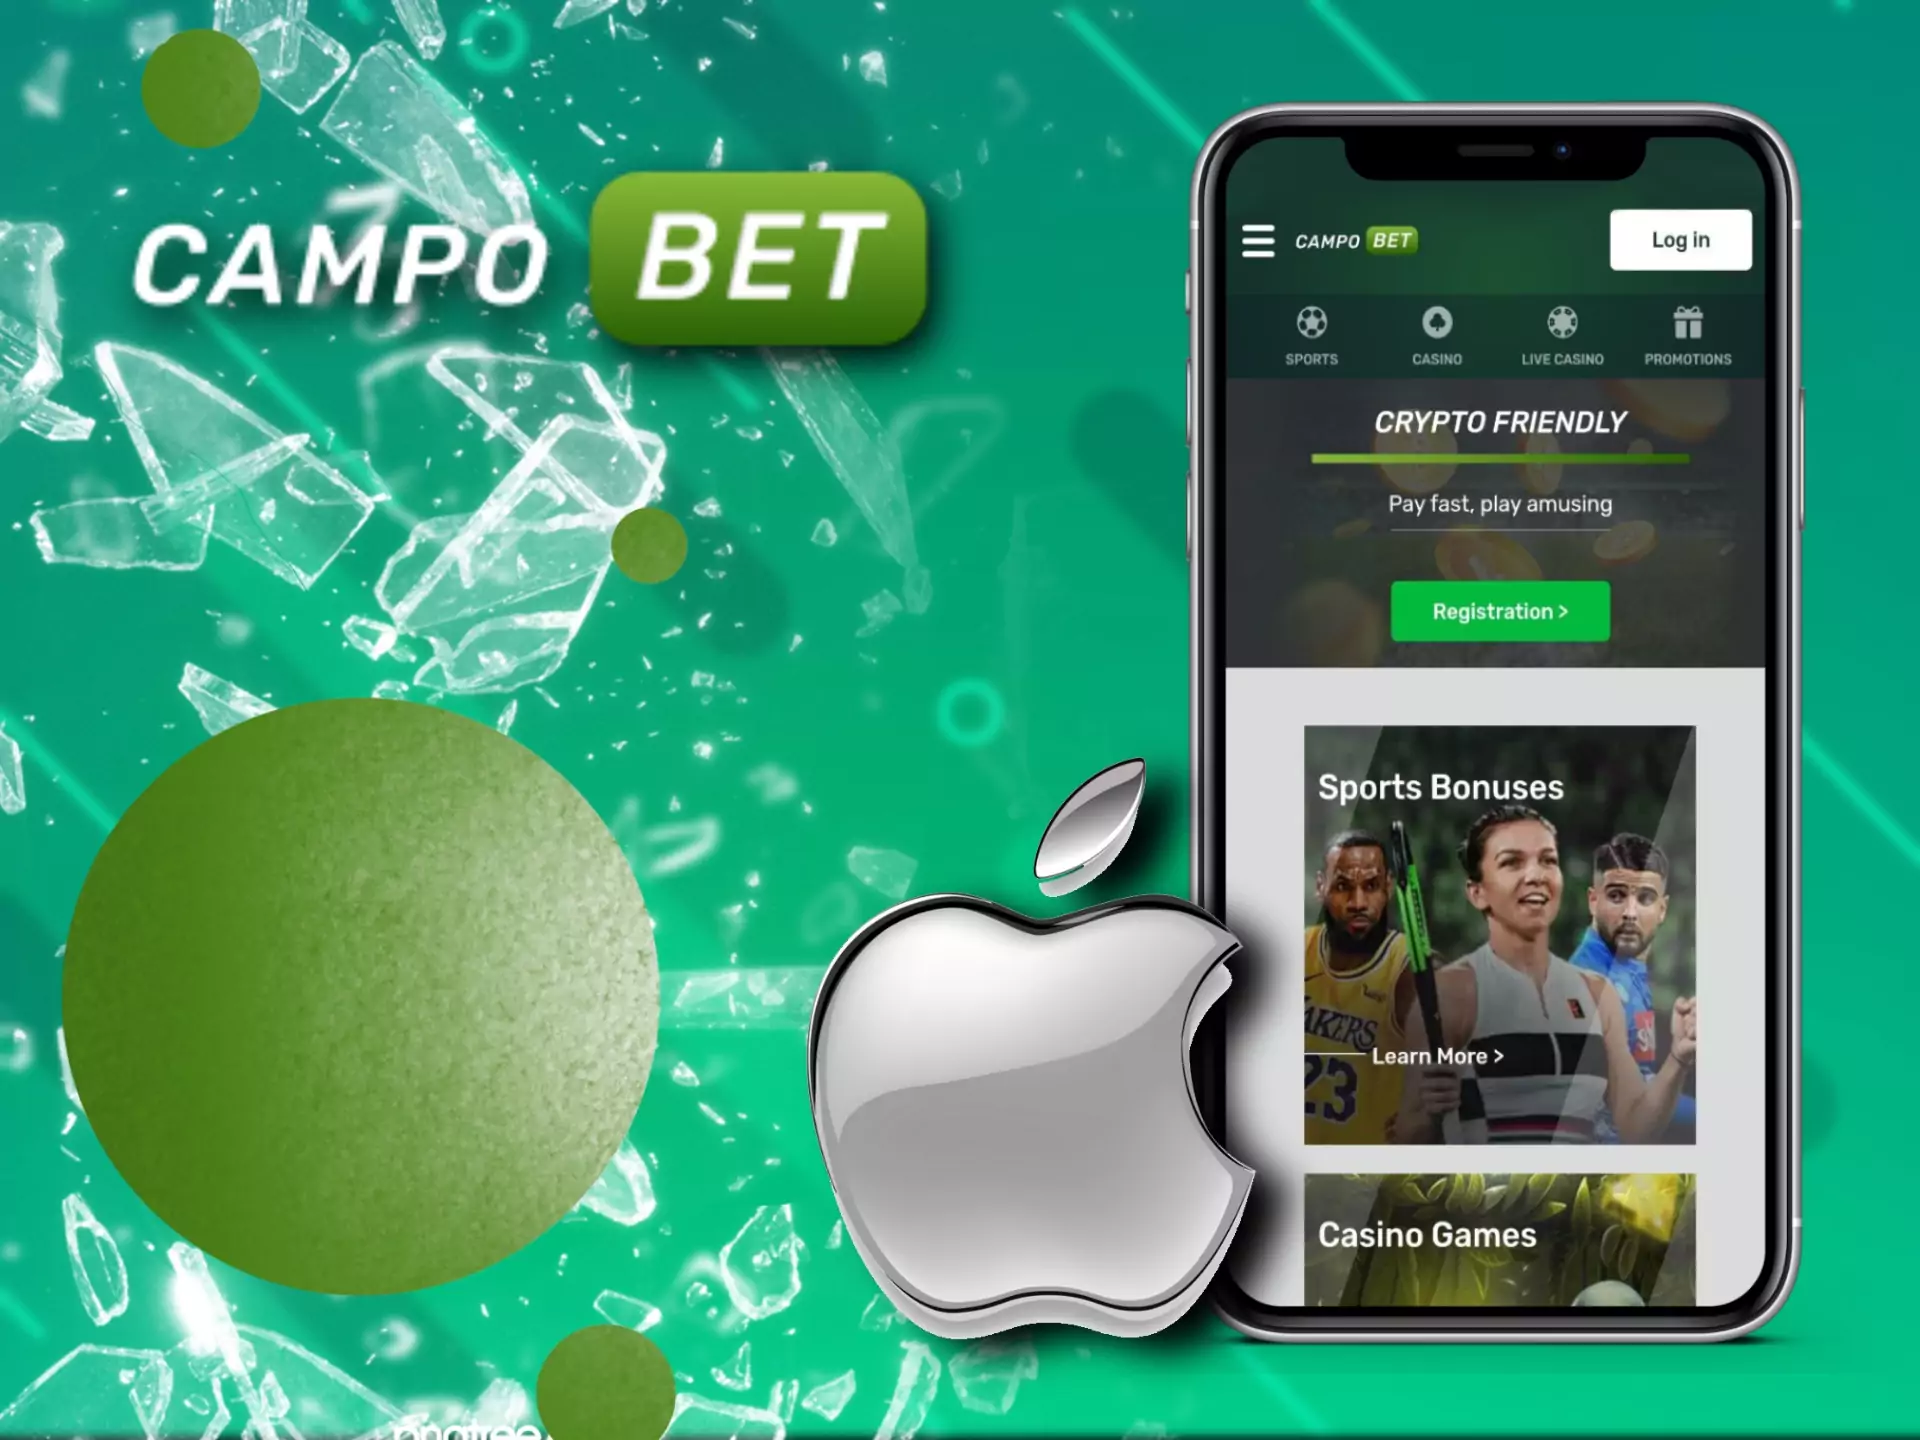 You can also install Campobet app on your iPhone or iPad.